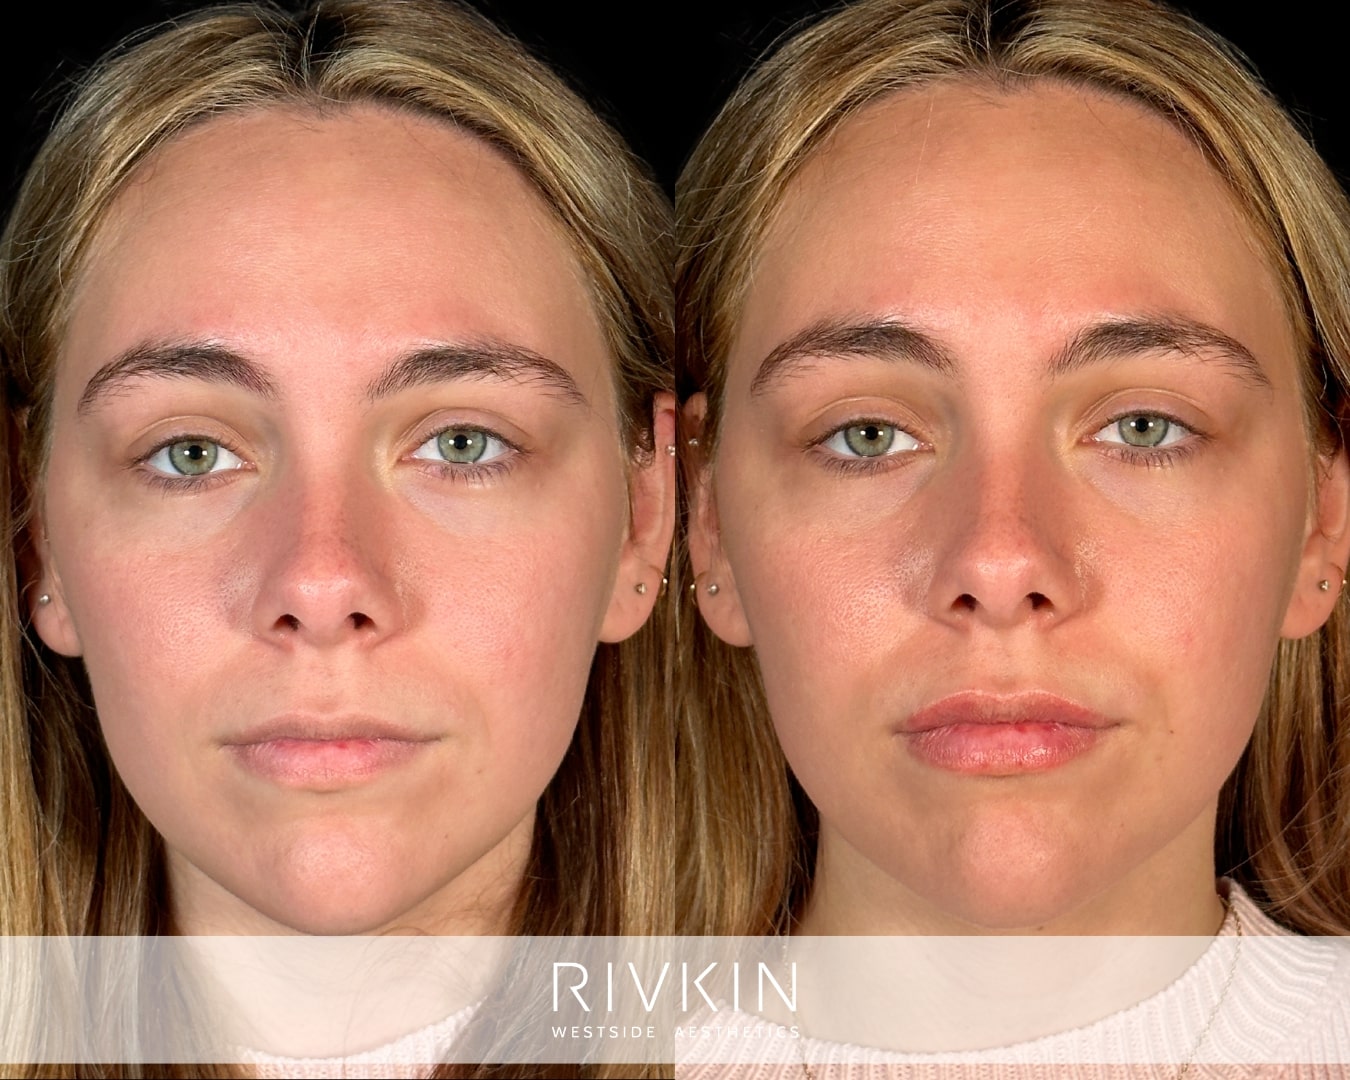 This patient received lip filler treatment in two sessions. She wanted plumper, more hydrated lips that complemented her face, and Nurse Practitioner Presile delivered exactly what she wanted.